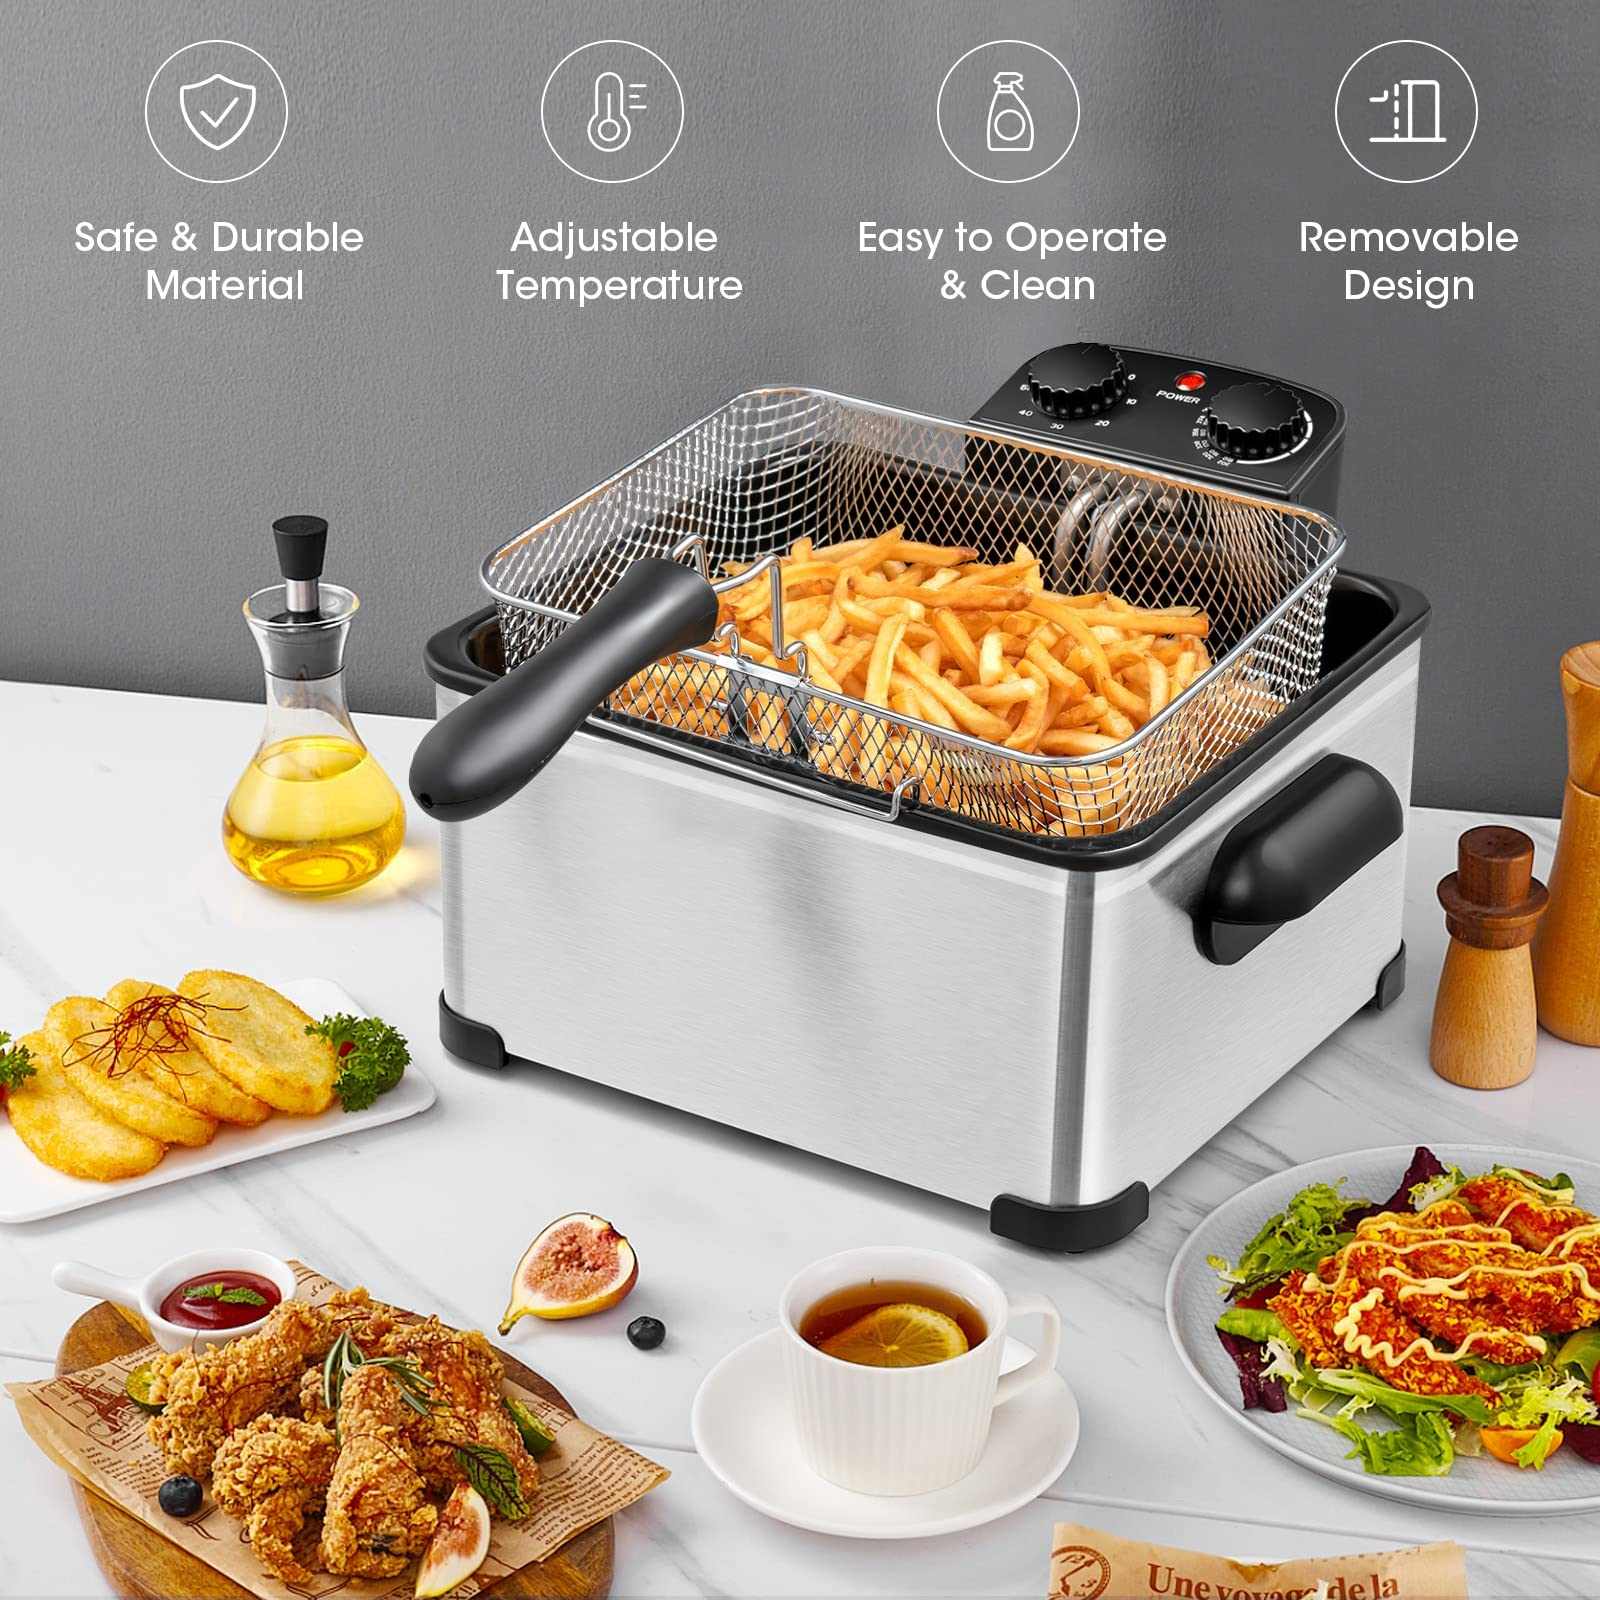 Giantex 1700W Electric Deep Fryer with 3 Baskets, 5.3QT/21-Cup Frier Cookers Home Fryer